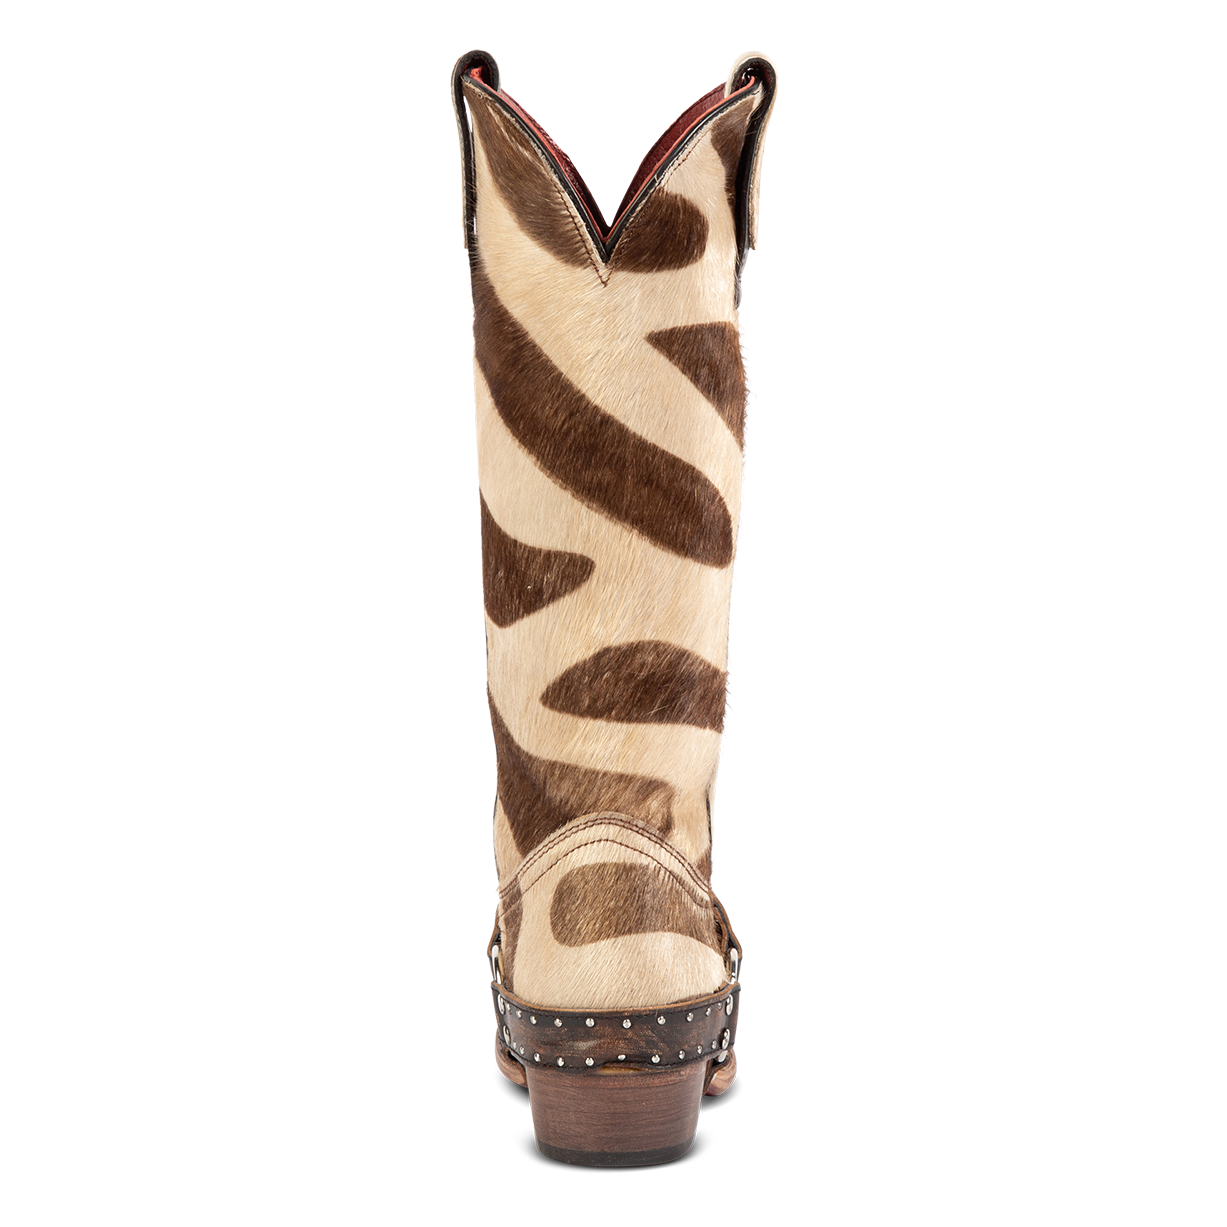 Back view showing scallop dip and embellished leather harness on FREEBIRD women's Lusitano jungle boot